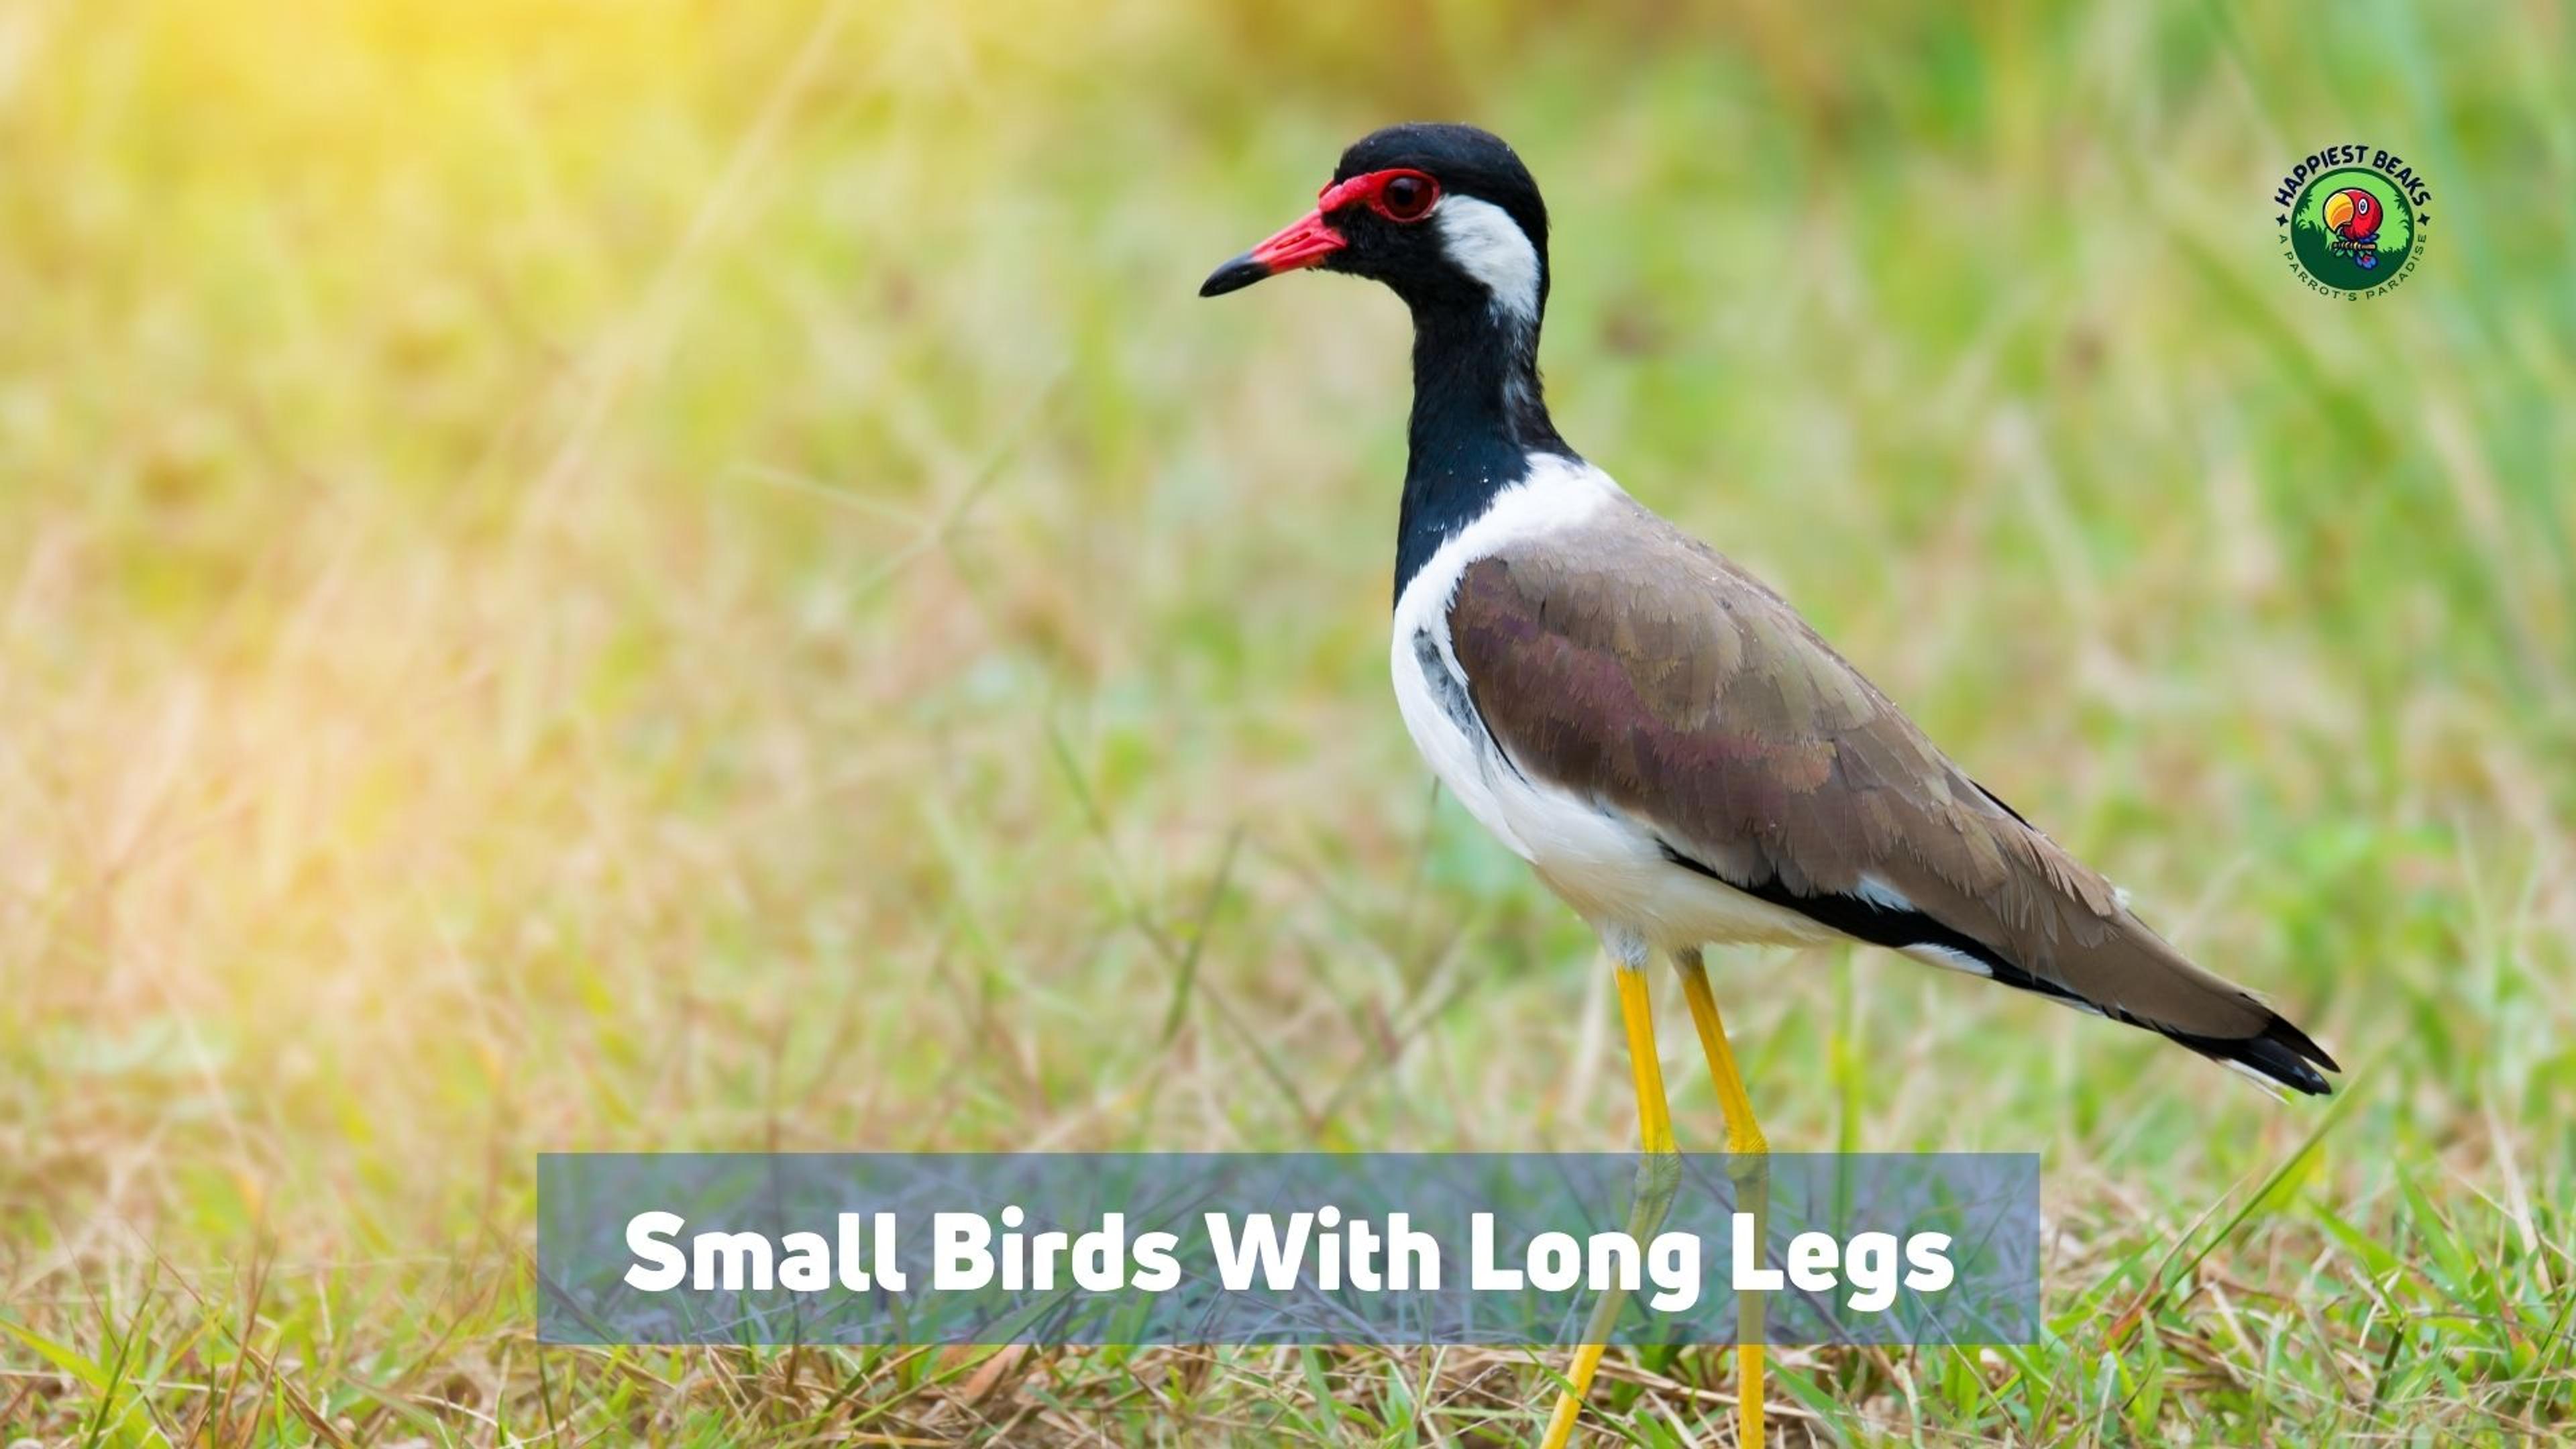 Small Birds With Long Legs